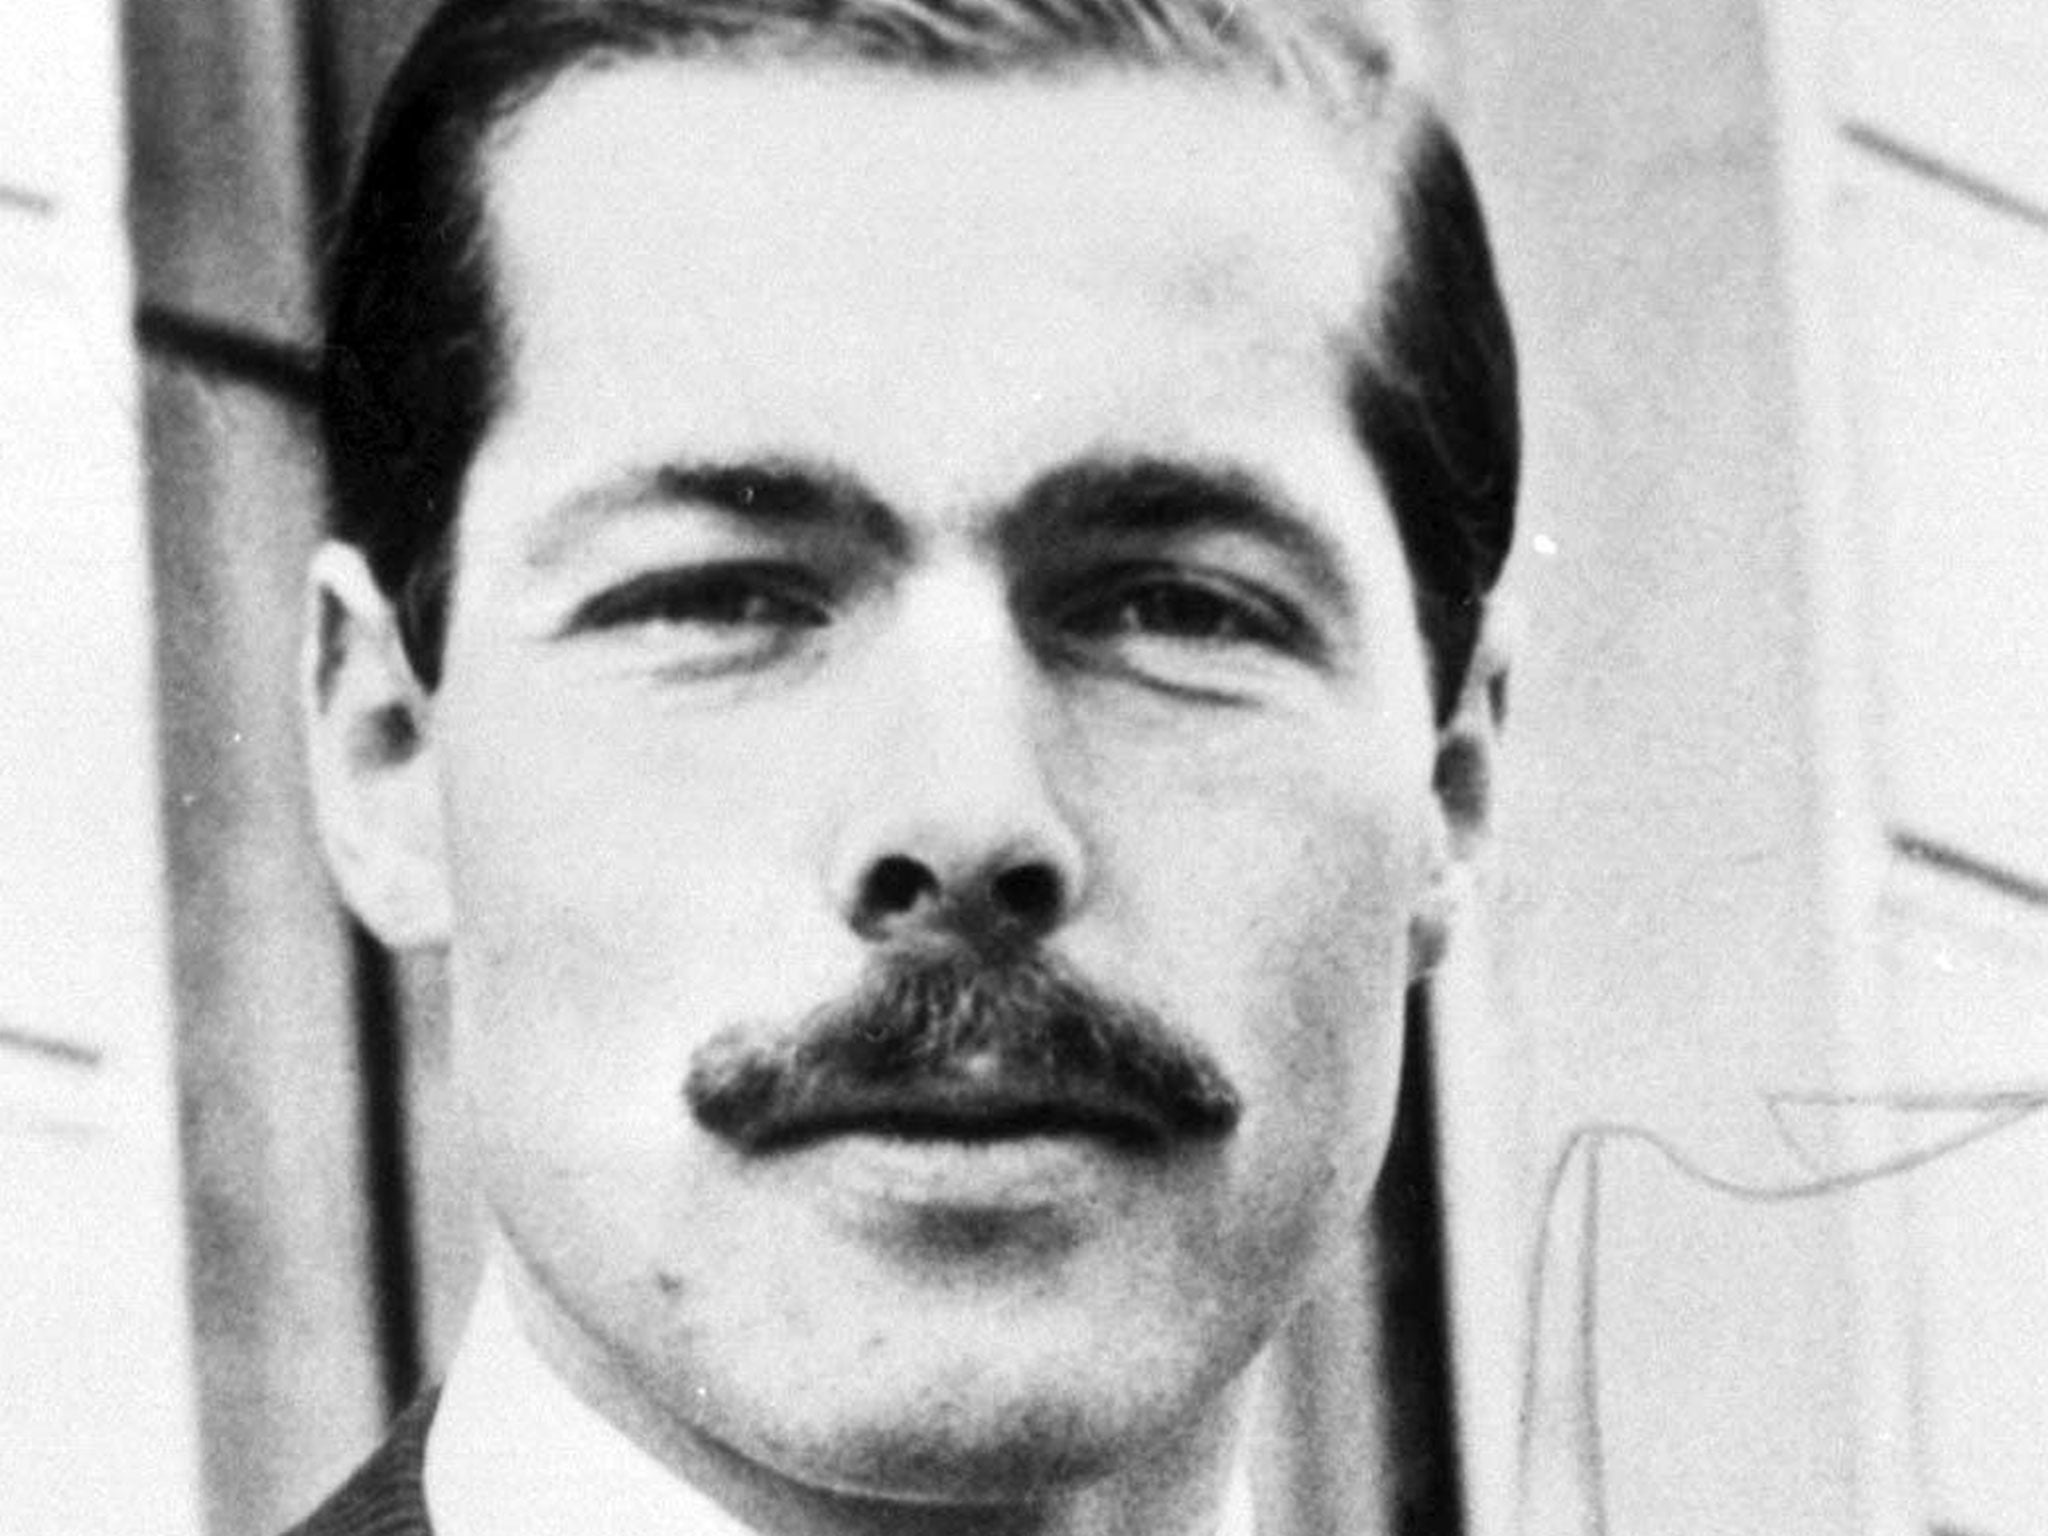 Lord Lucan drowned himself after accidentally killing family nanny The Independent The Independent